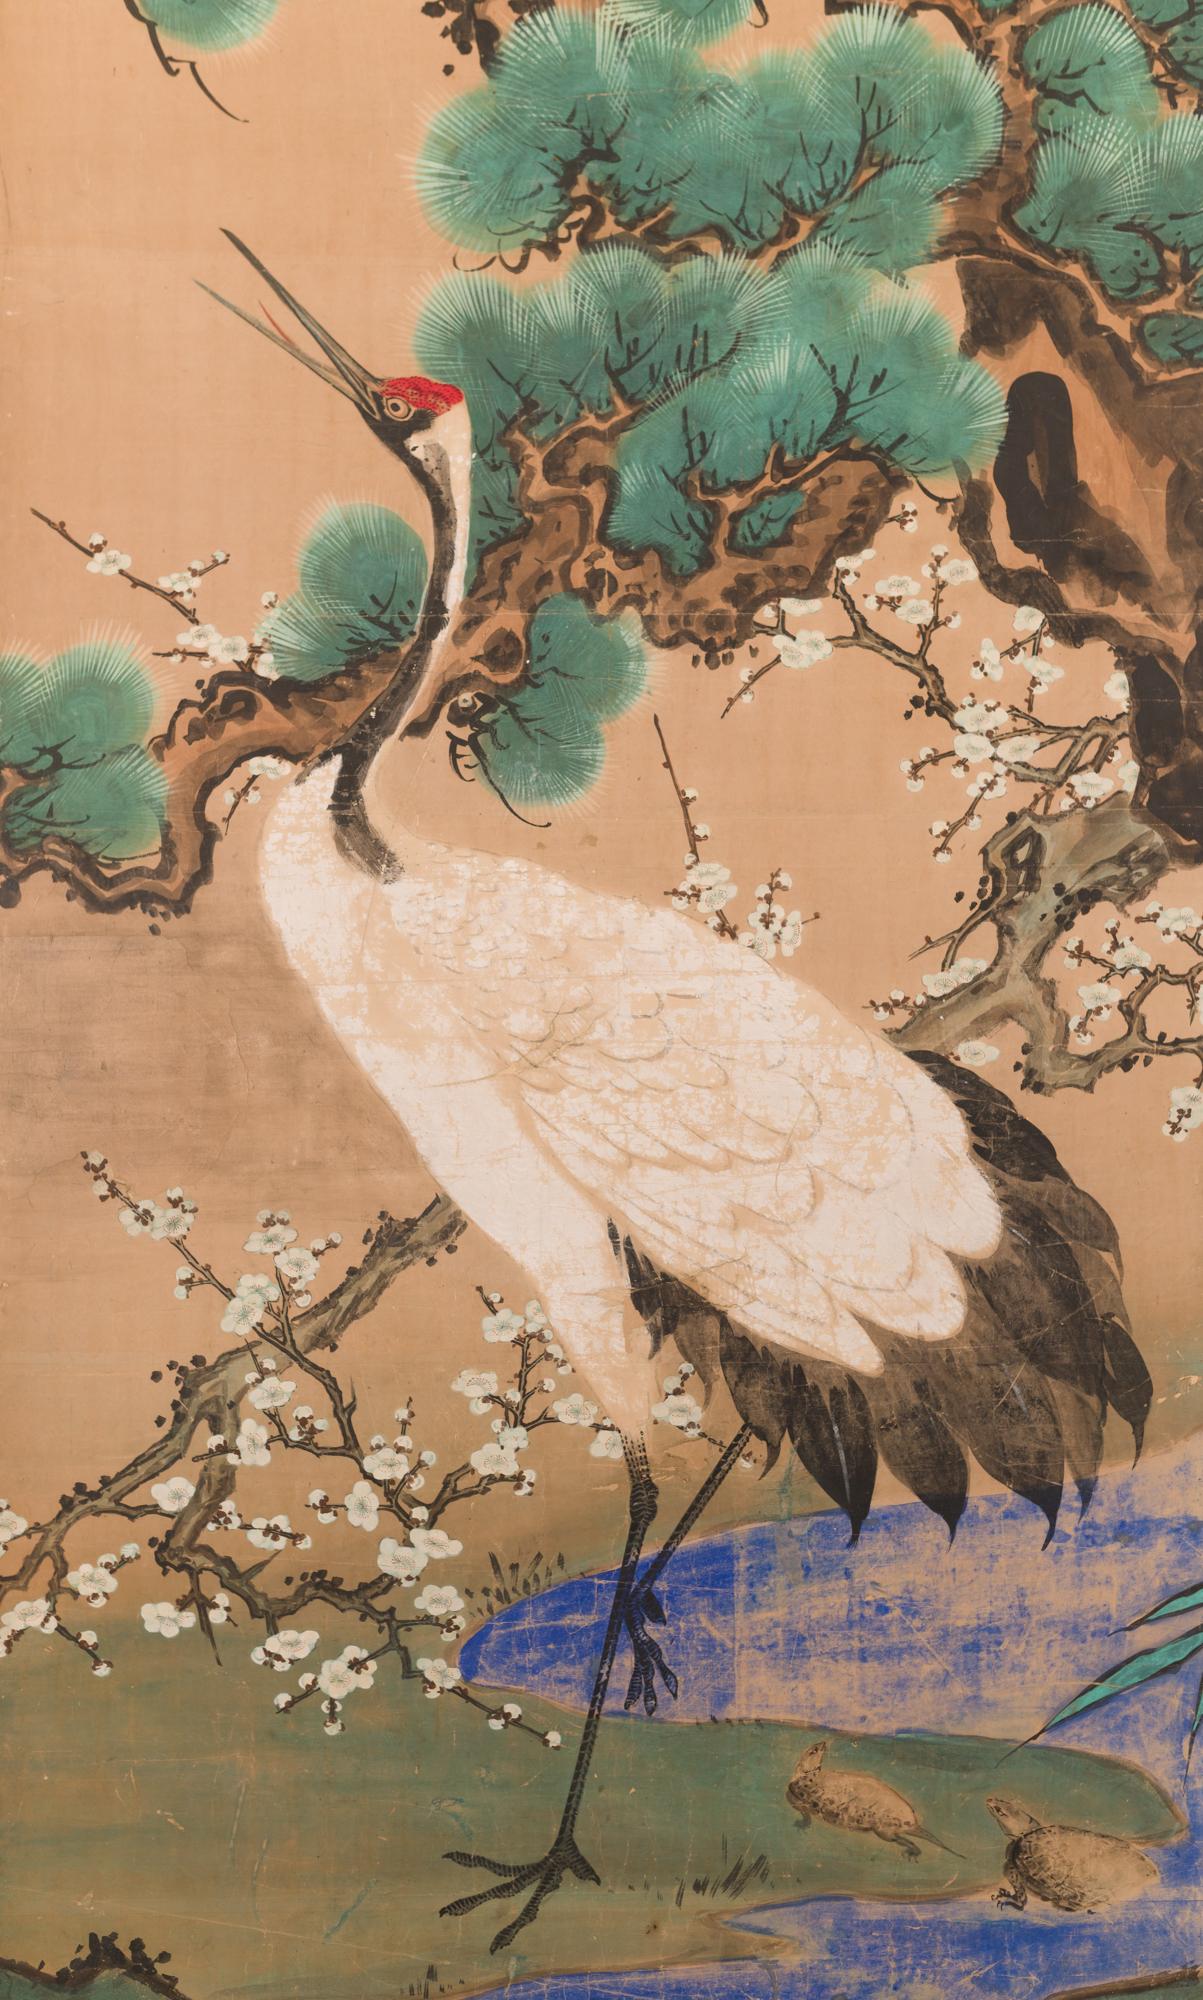 In Japan, cranes symbolize fidelity as they mate for life and turtles symbolize longevity. Additionally, this screen also has the Japanese motif of sho-chiku-bai, or the three friends of winter (pine, plum, and bamboo). So called the three friends